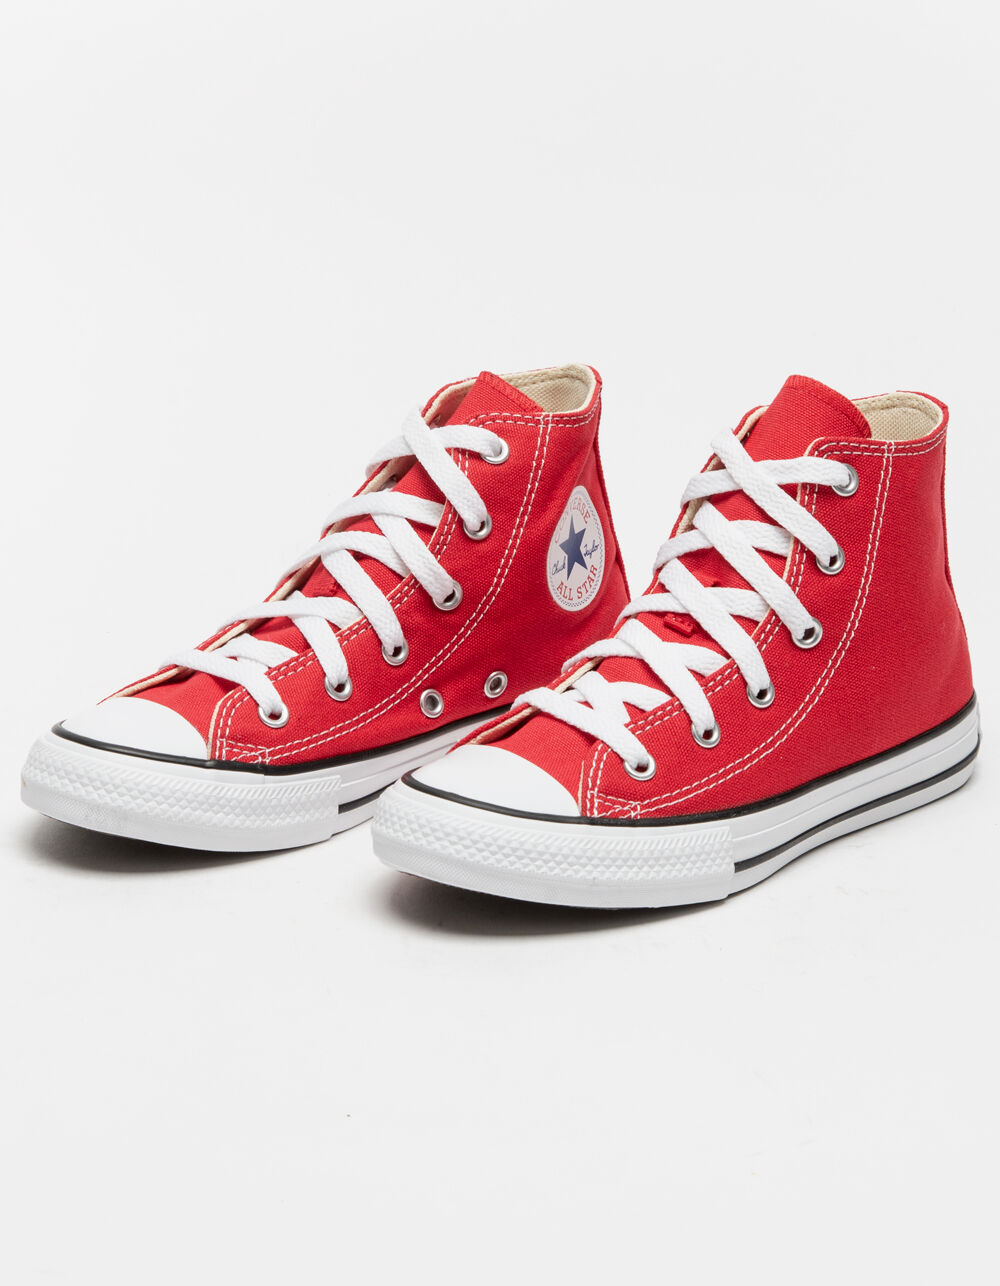 CONVERSE Chuck Taylor All Star High Top Kids Shoes - RED | Tillys